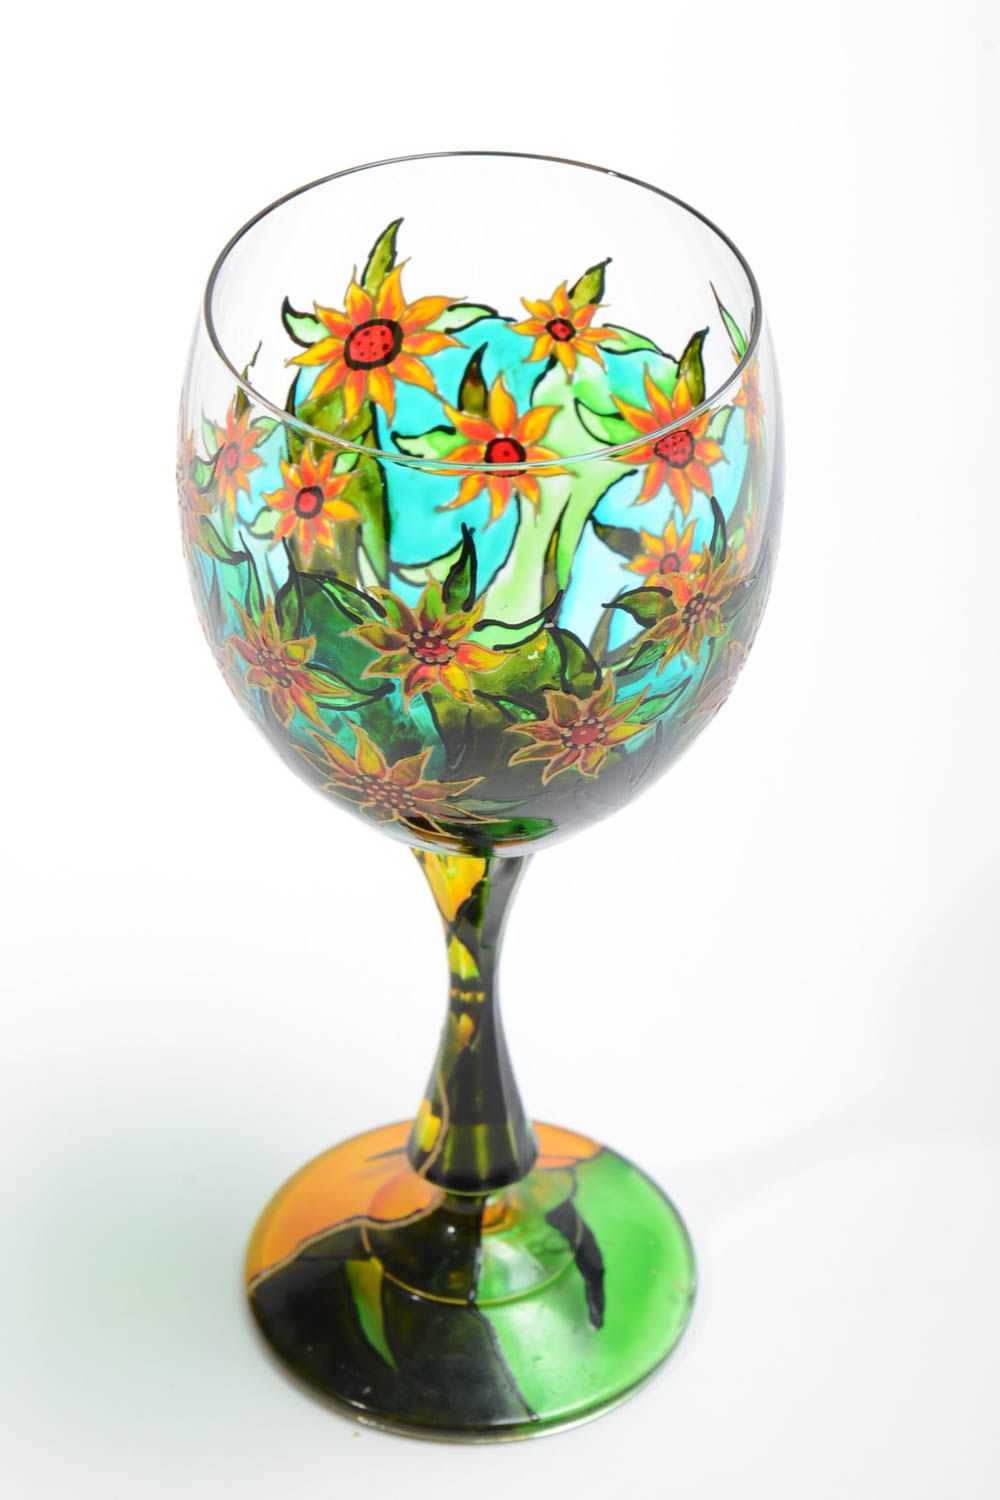 Painted wine glass wine goblets 300 ml handmade drinking glass cool gift ideas photo 3